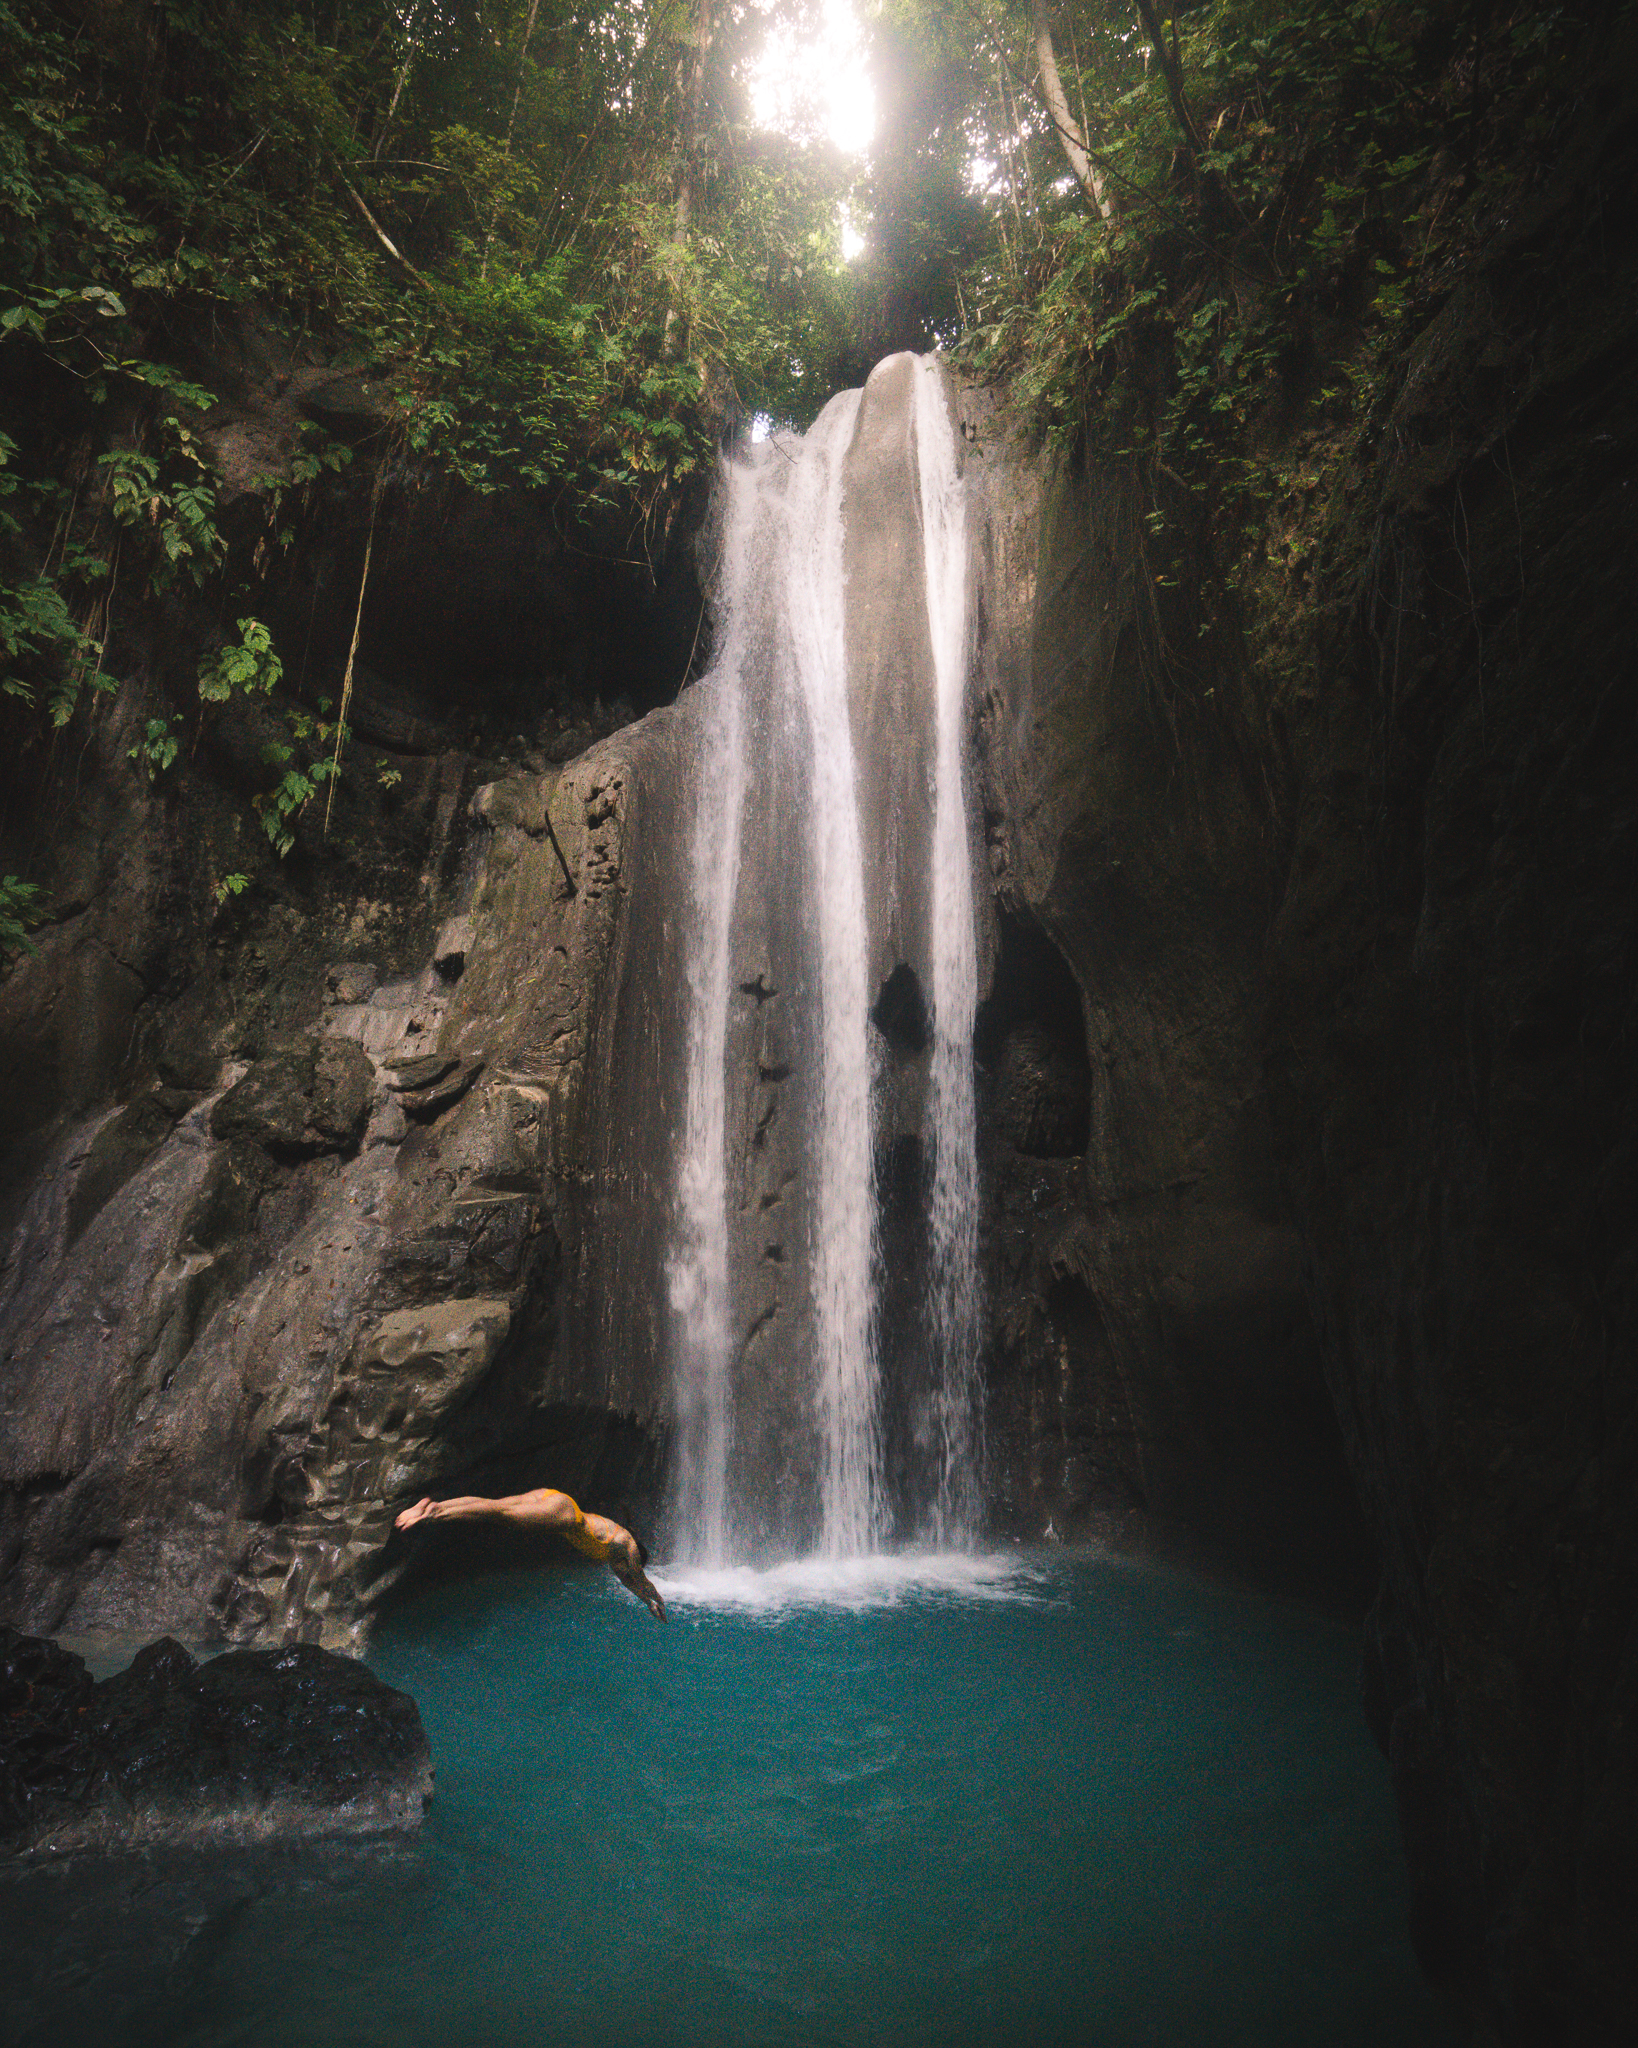 Diving off one of the lower rocks at Binalayan Waterfall, Cebu, Philippines